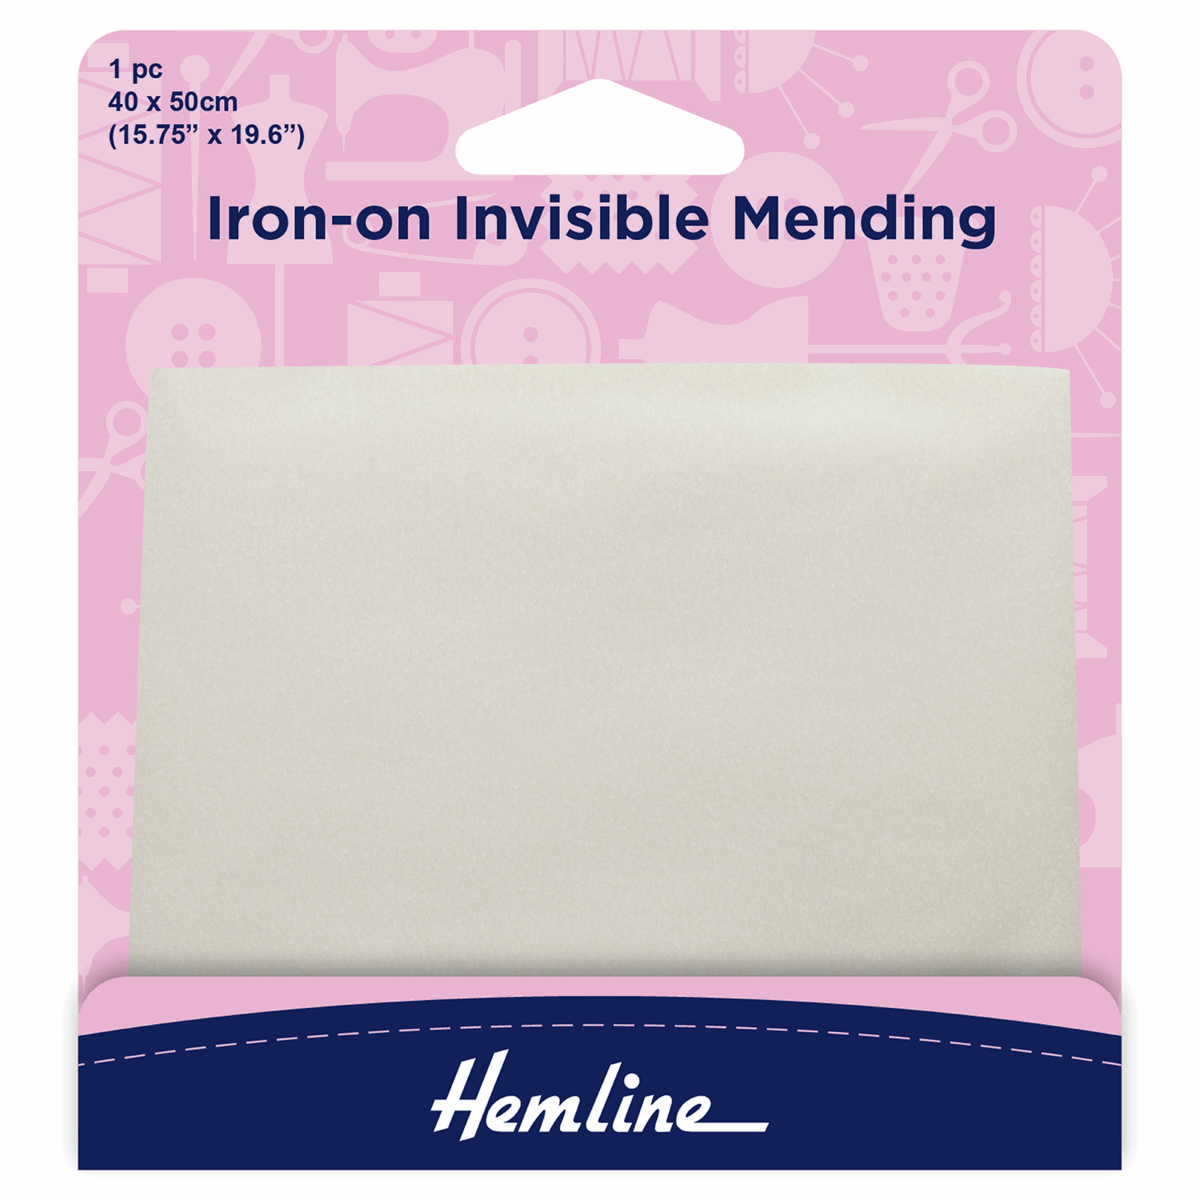 Iron-On Invisible Mending - 40cm x 50cm